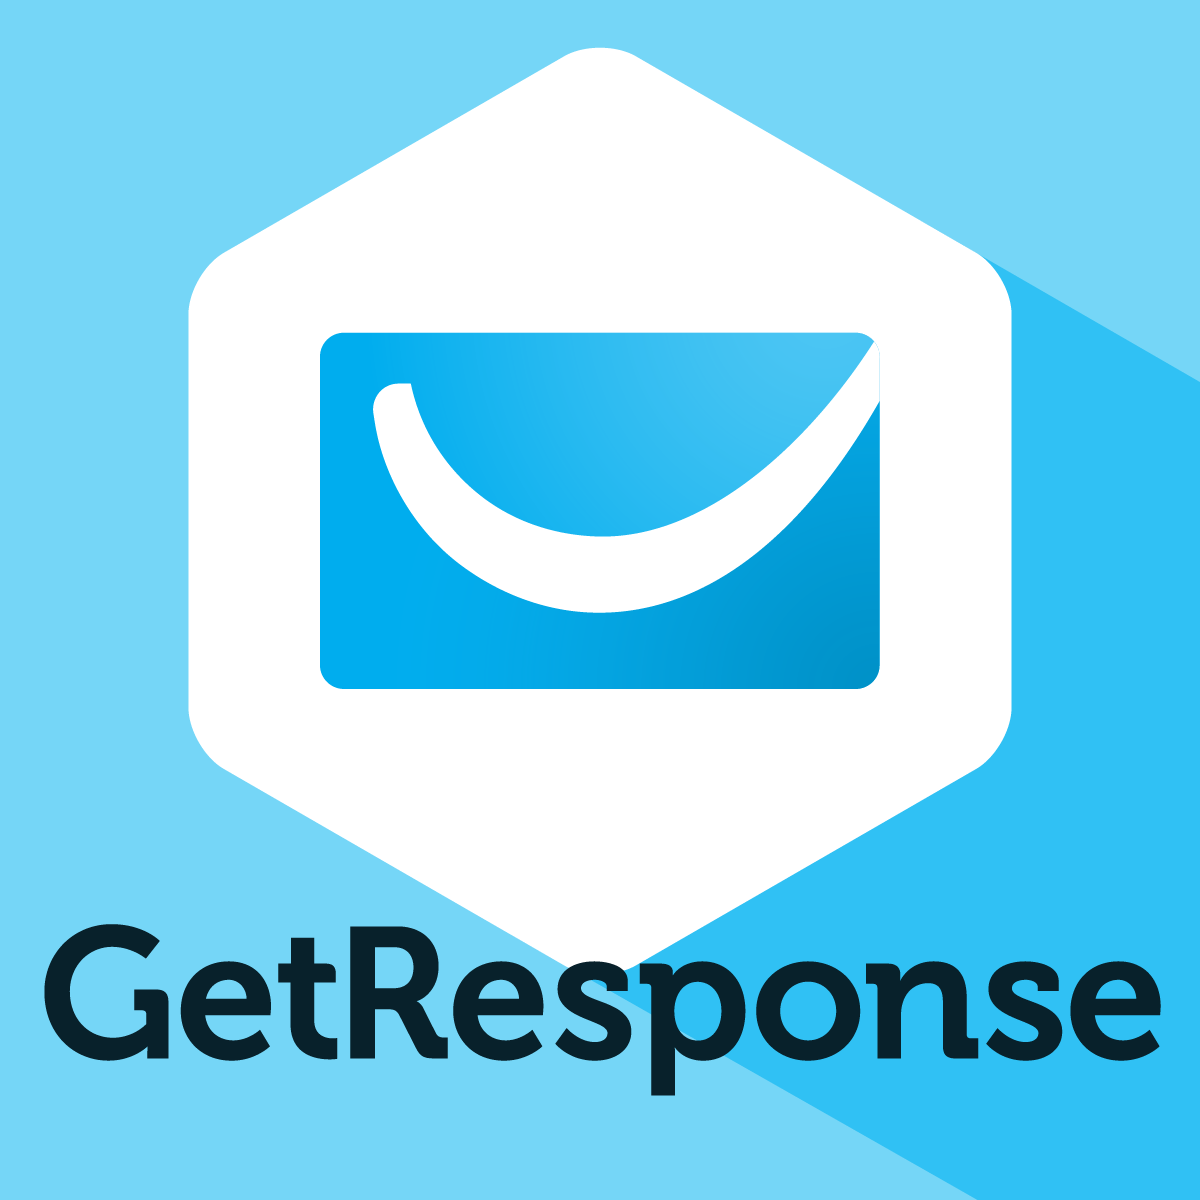 Hire Shopify Experts to integrate GetResponse Email Marketing app into a Shopify store